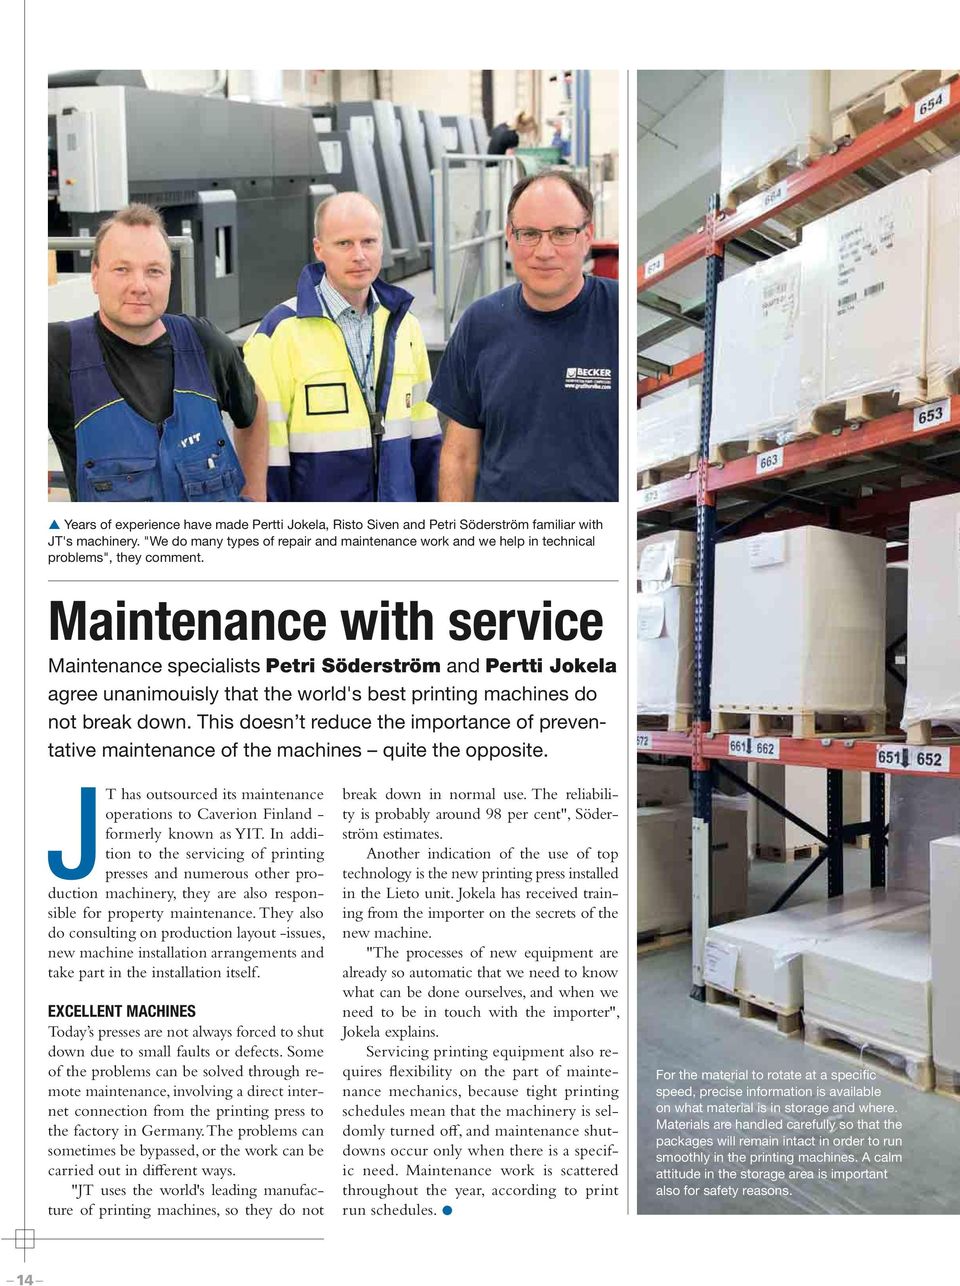 Maintenance with service Maintenance specialists Petri Söderström and Pertti Jokela agree unanimouisly that the world's best printing machines do not break down.